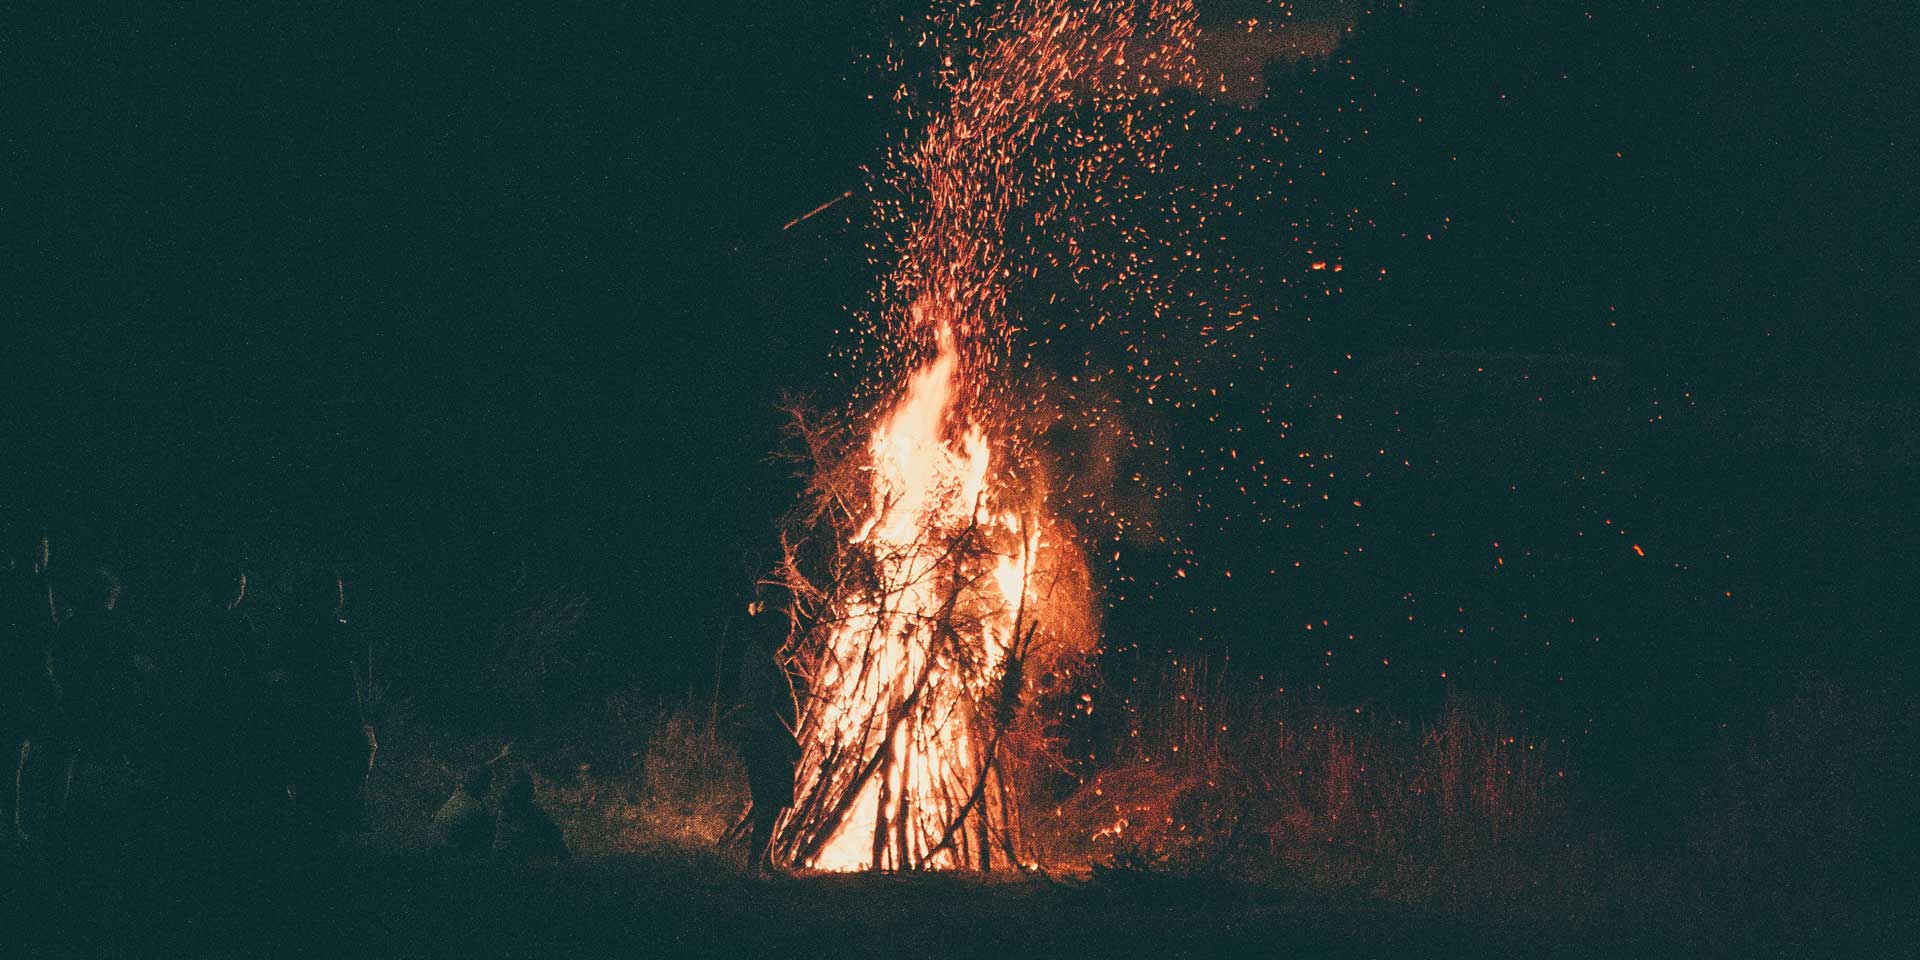 A bonfire crackling in the night, casting a warm, witchy glow as sparks dance into the dark sky.